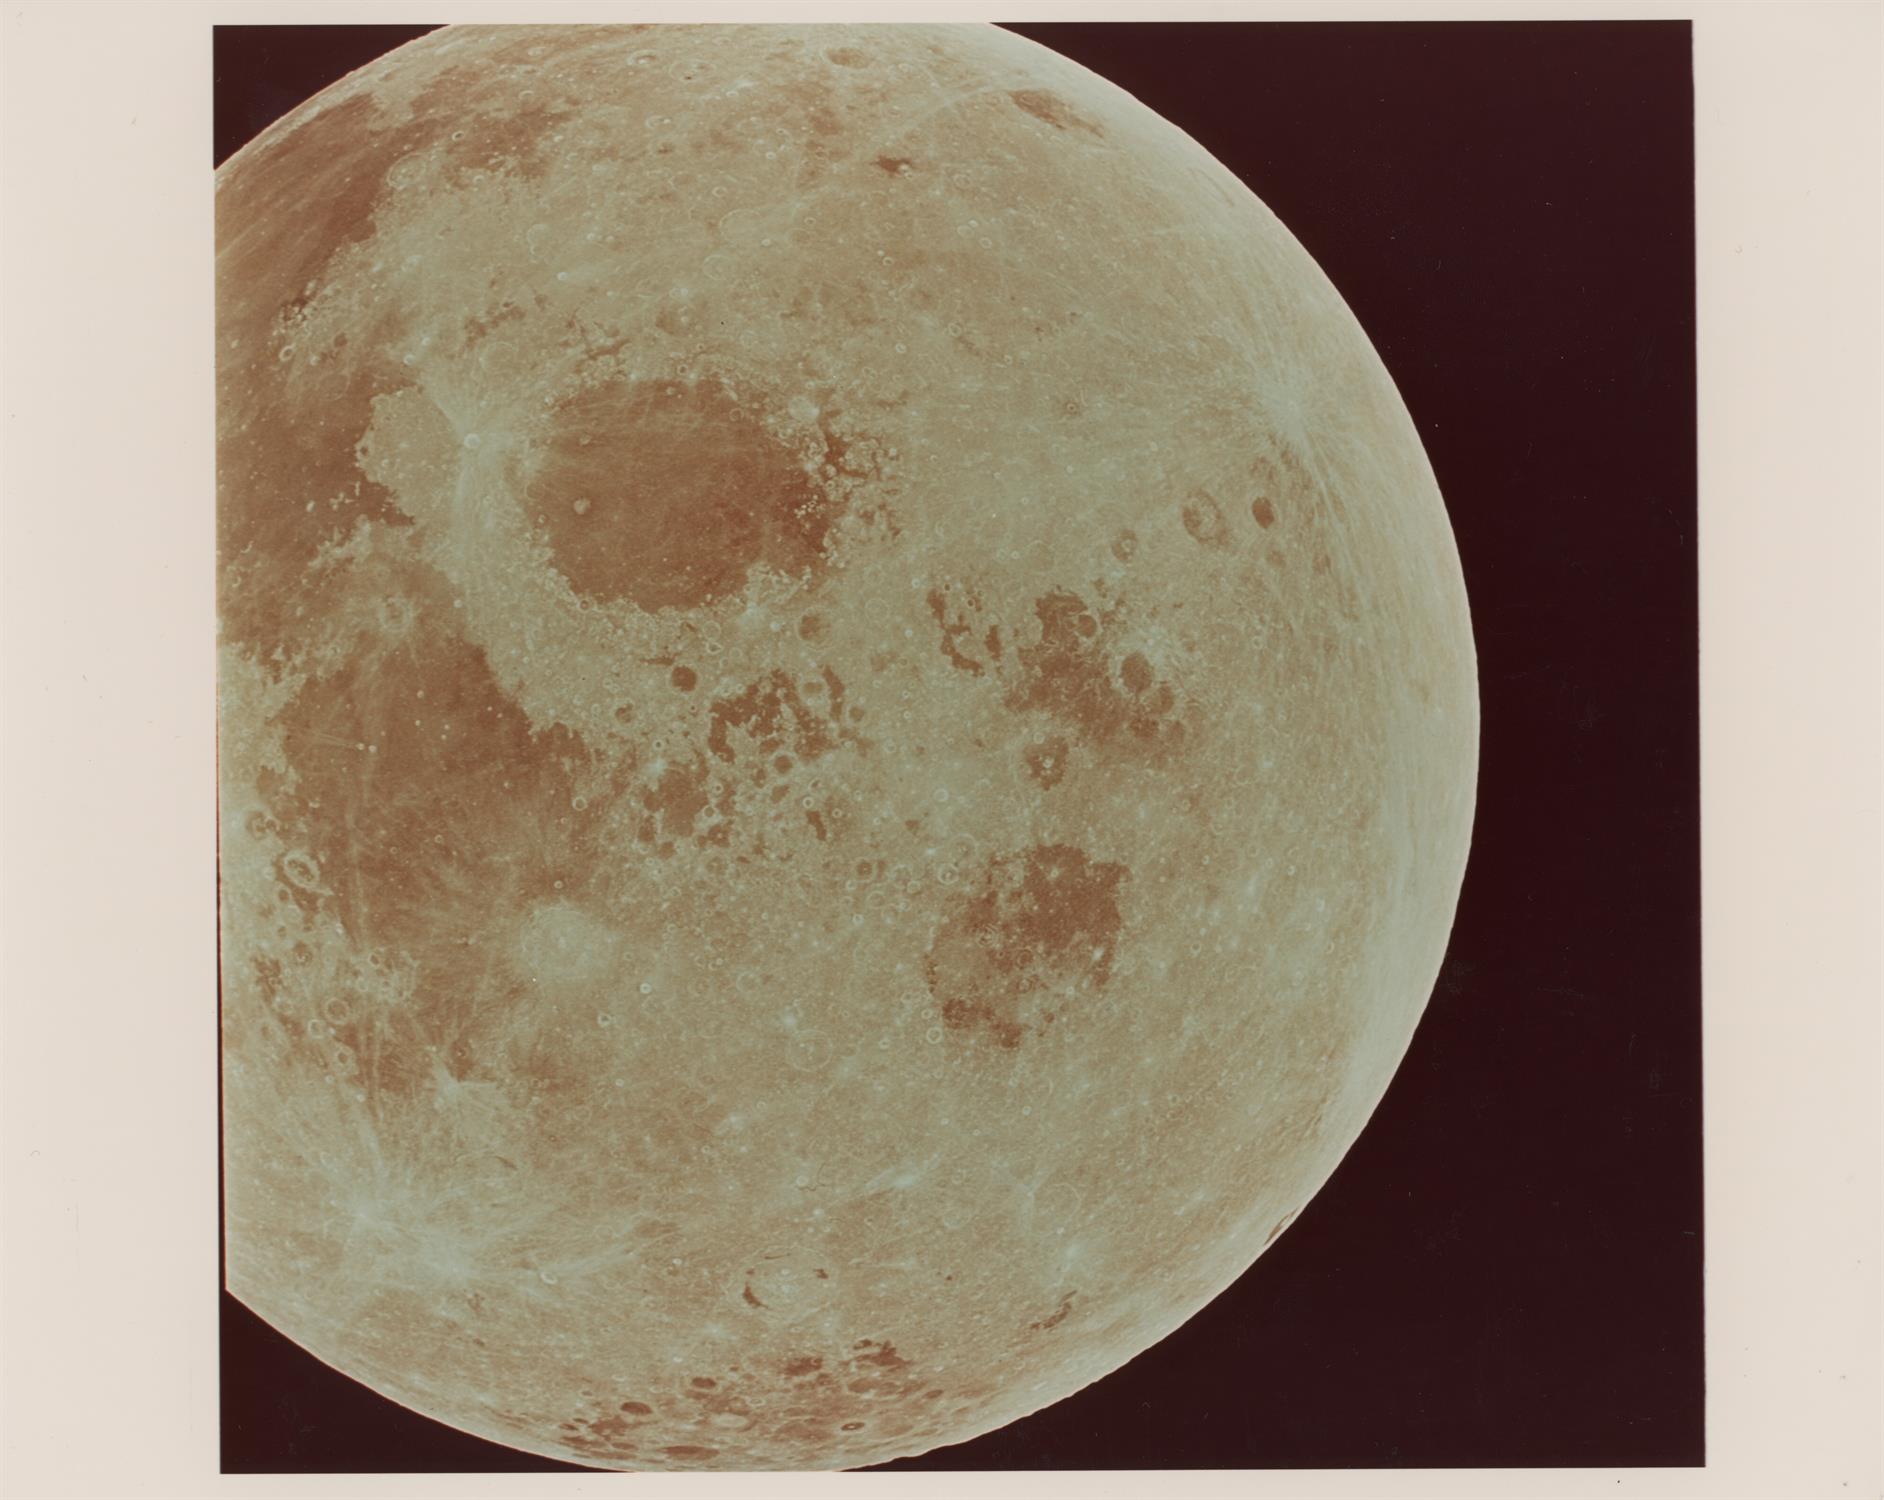 Views of the receding Moon after transearth injection, Apollo 11, July 1969 - Image 2 of 4